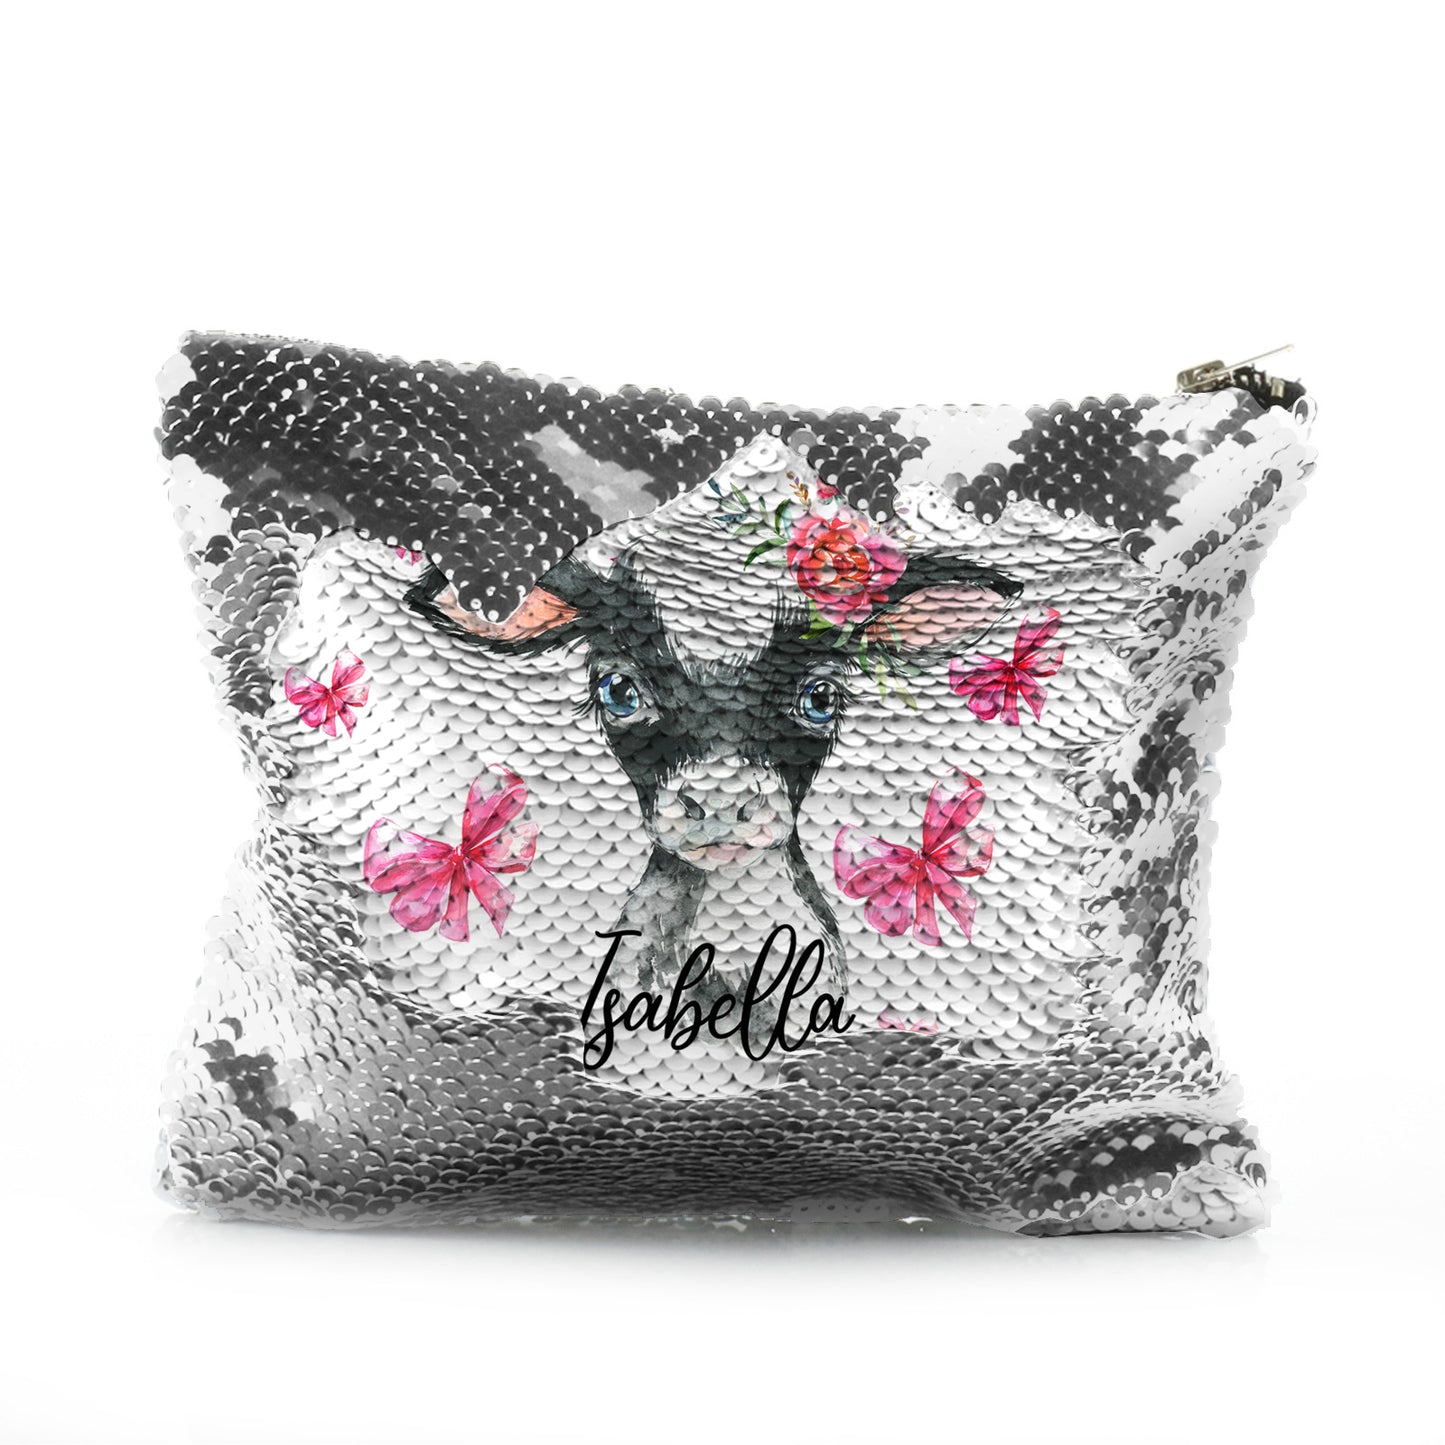 Personalised Sequin Zip Bag with Cow Pink Bows and Cute Text